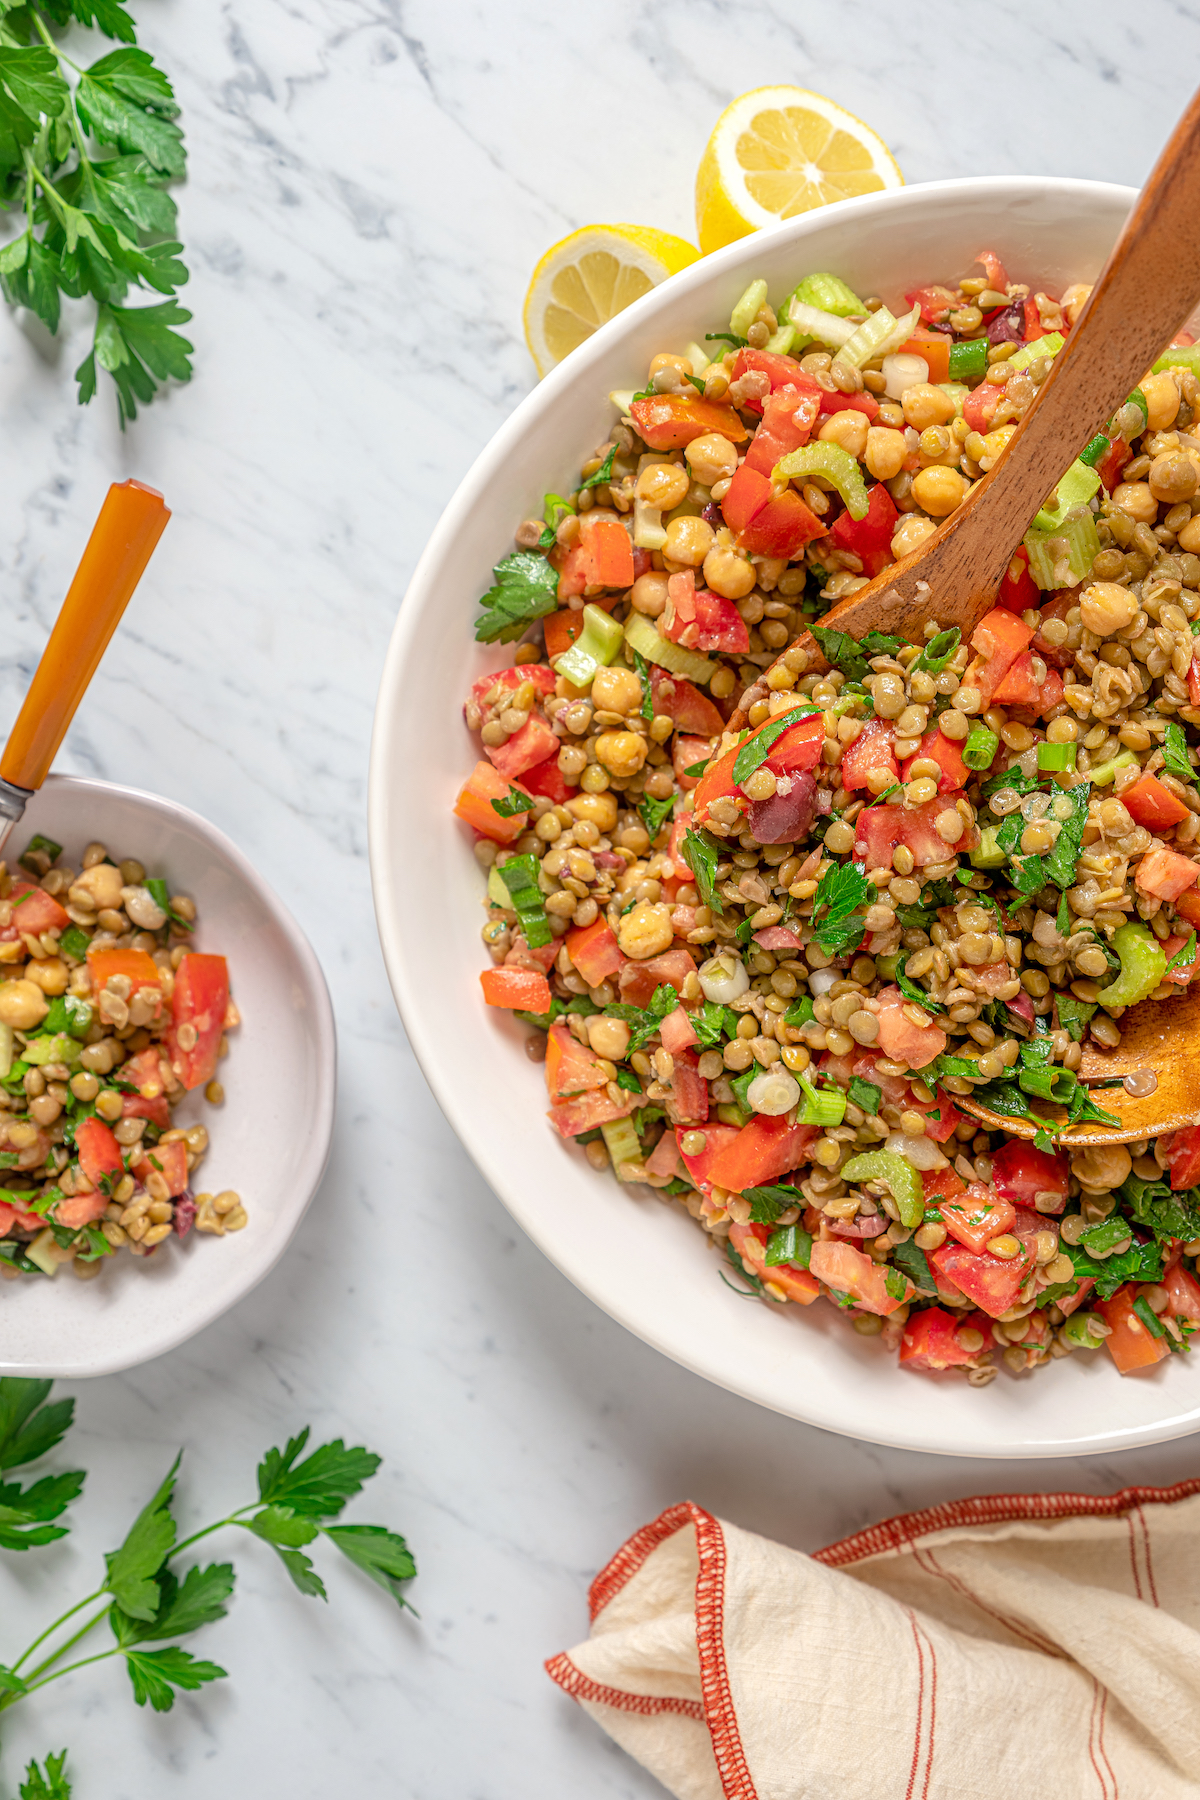 A small plate of lentil salad with a larger bowl of the salad.